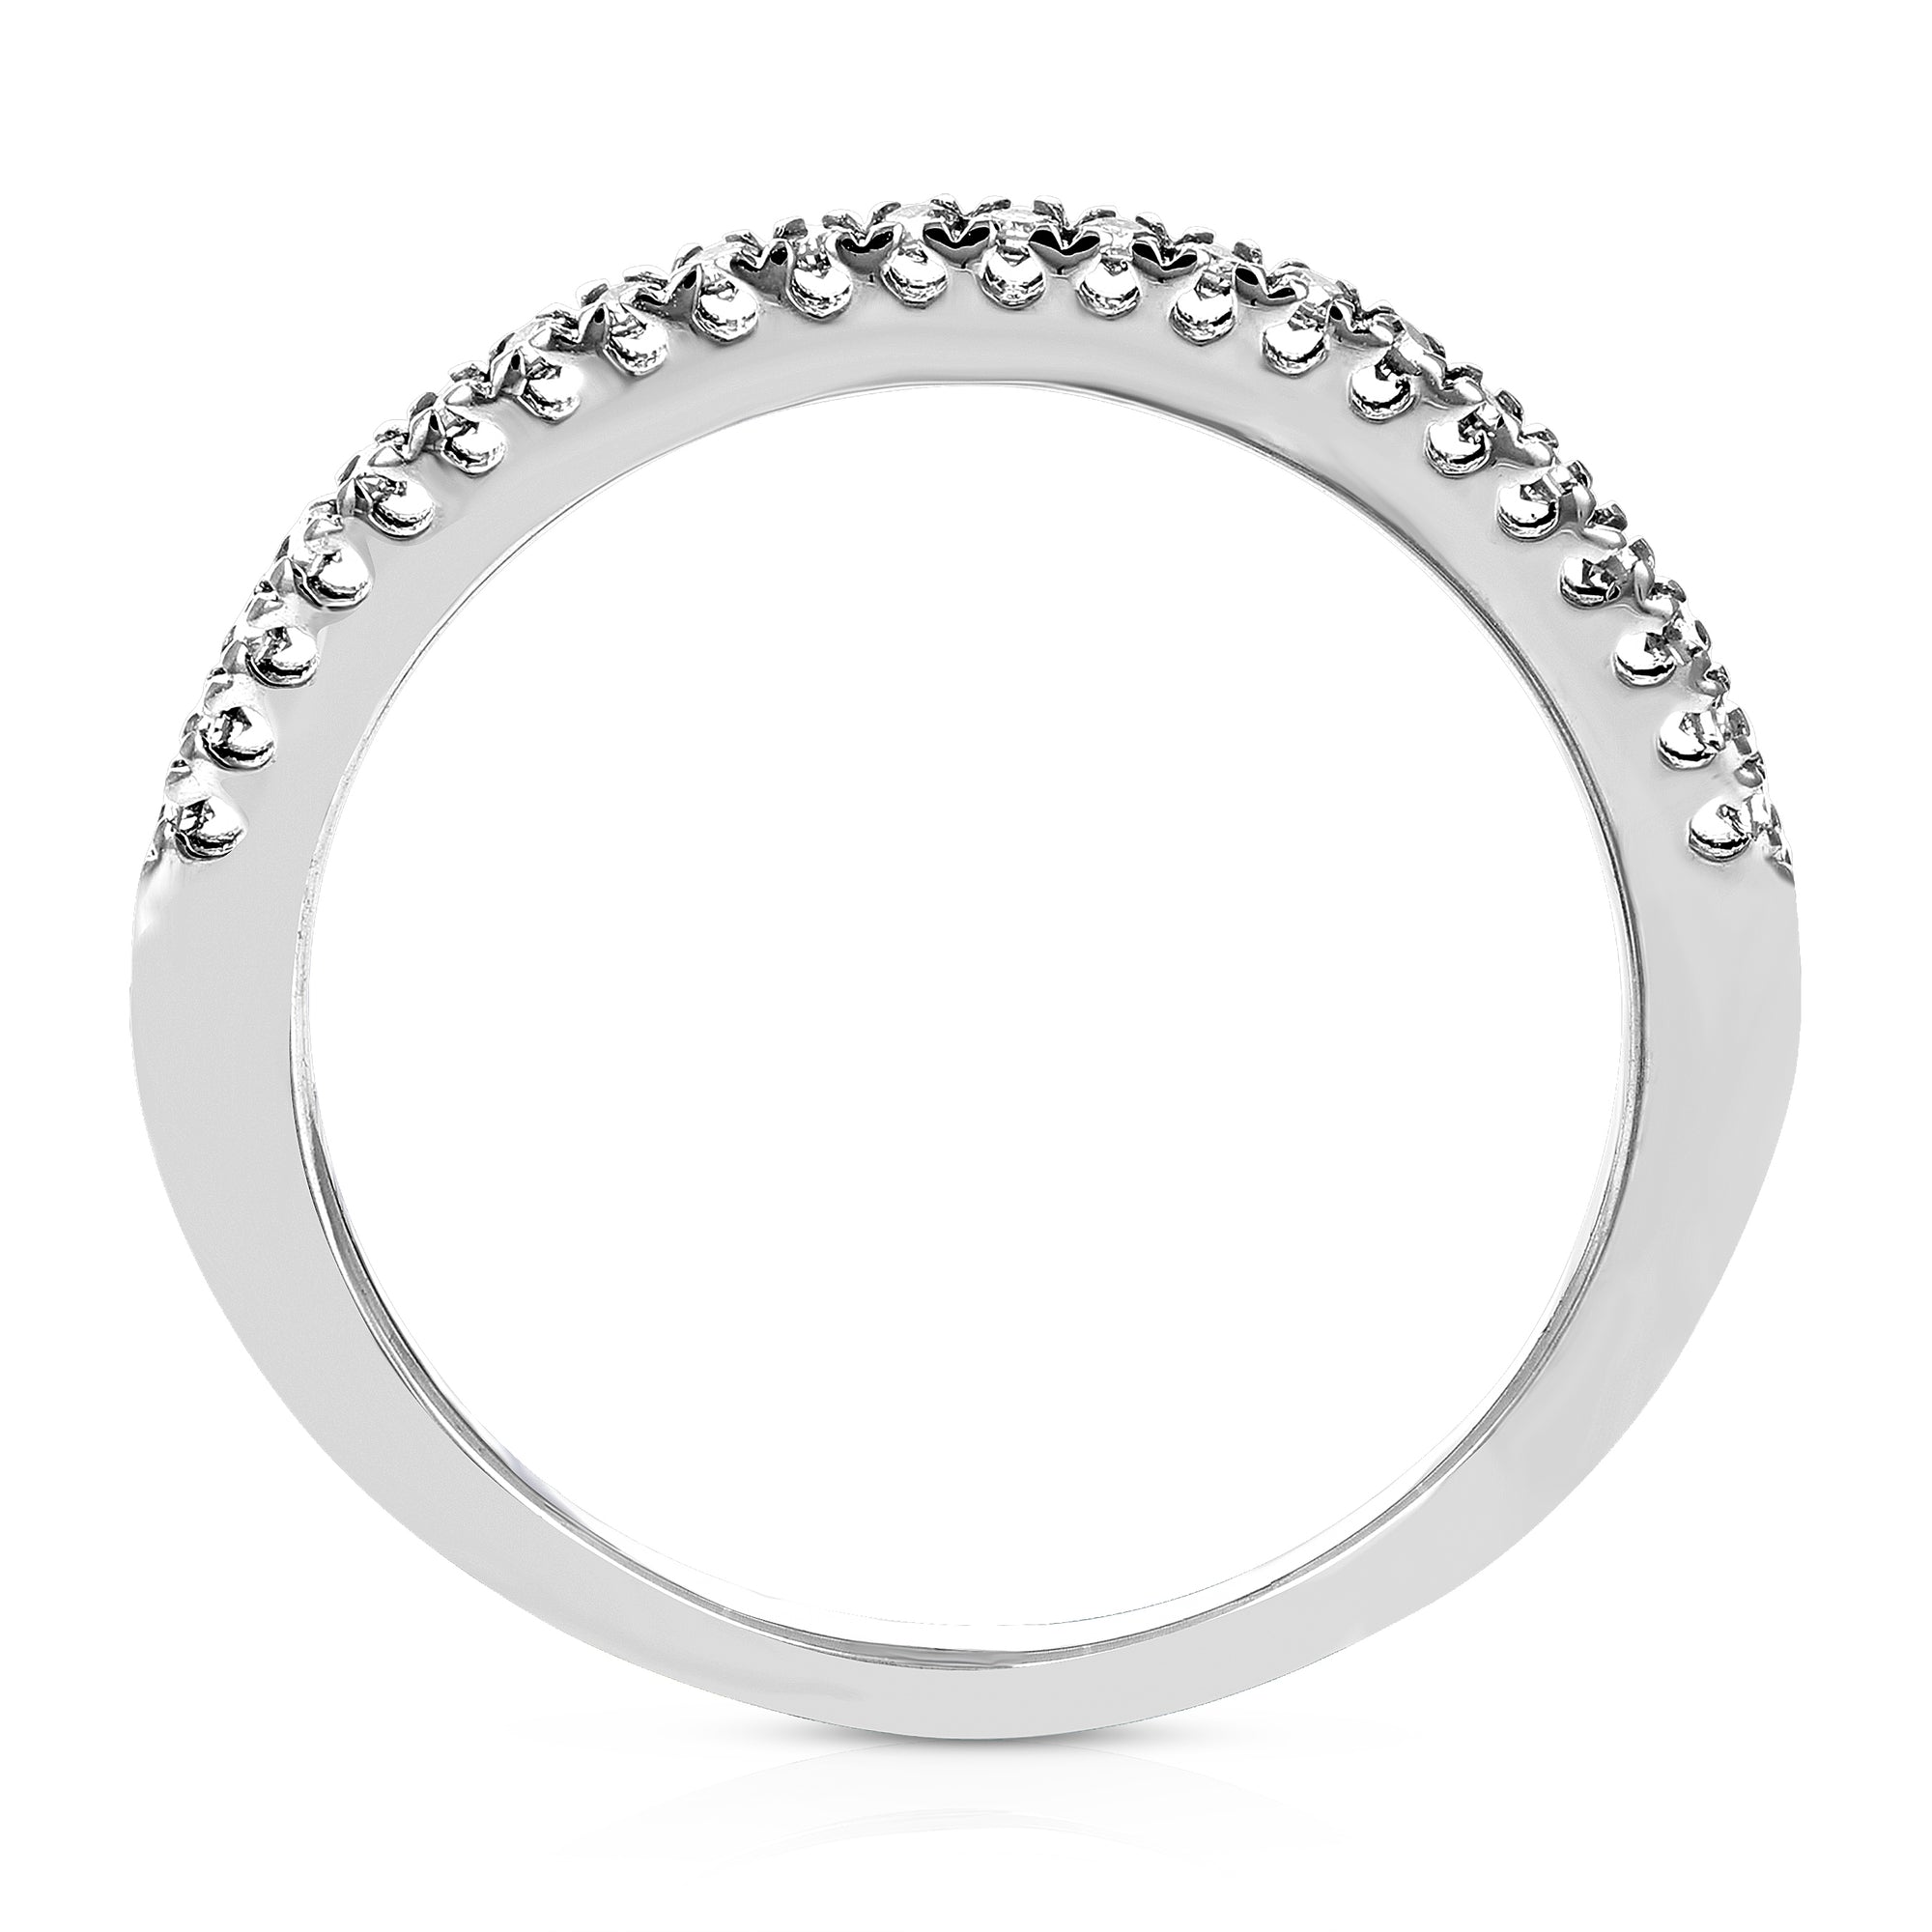 1/6 cttw Pave Round Diamond Wedding Band for Women in 10K White Gold Prong Set, Size 4.5-10